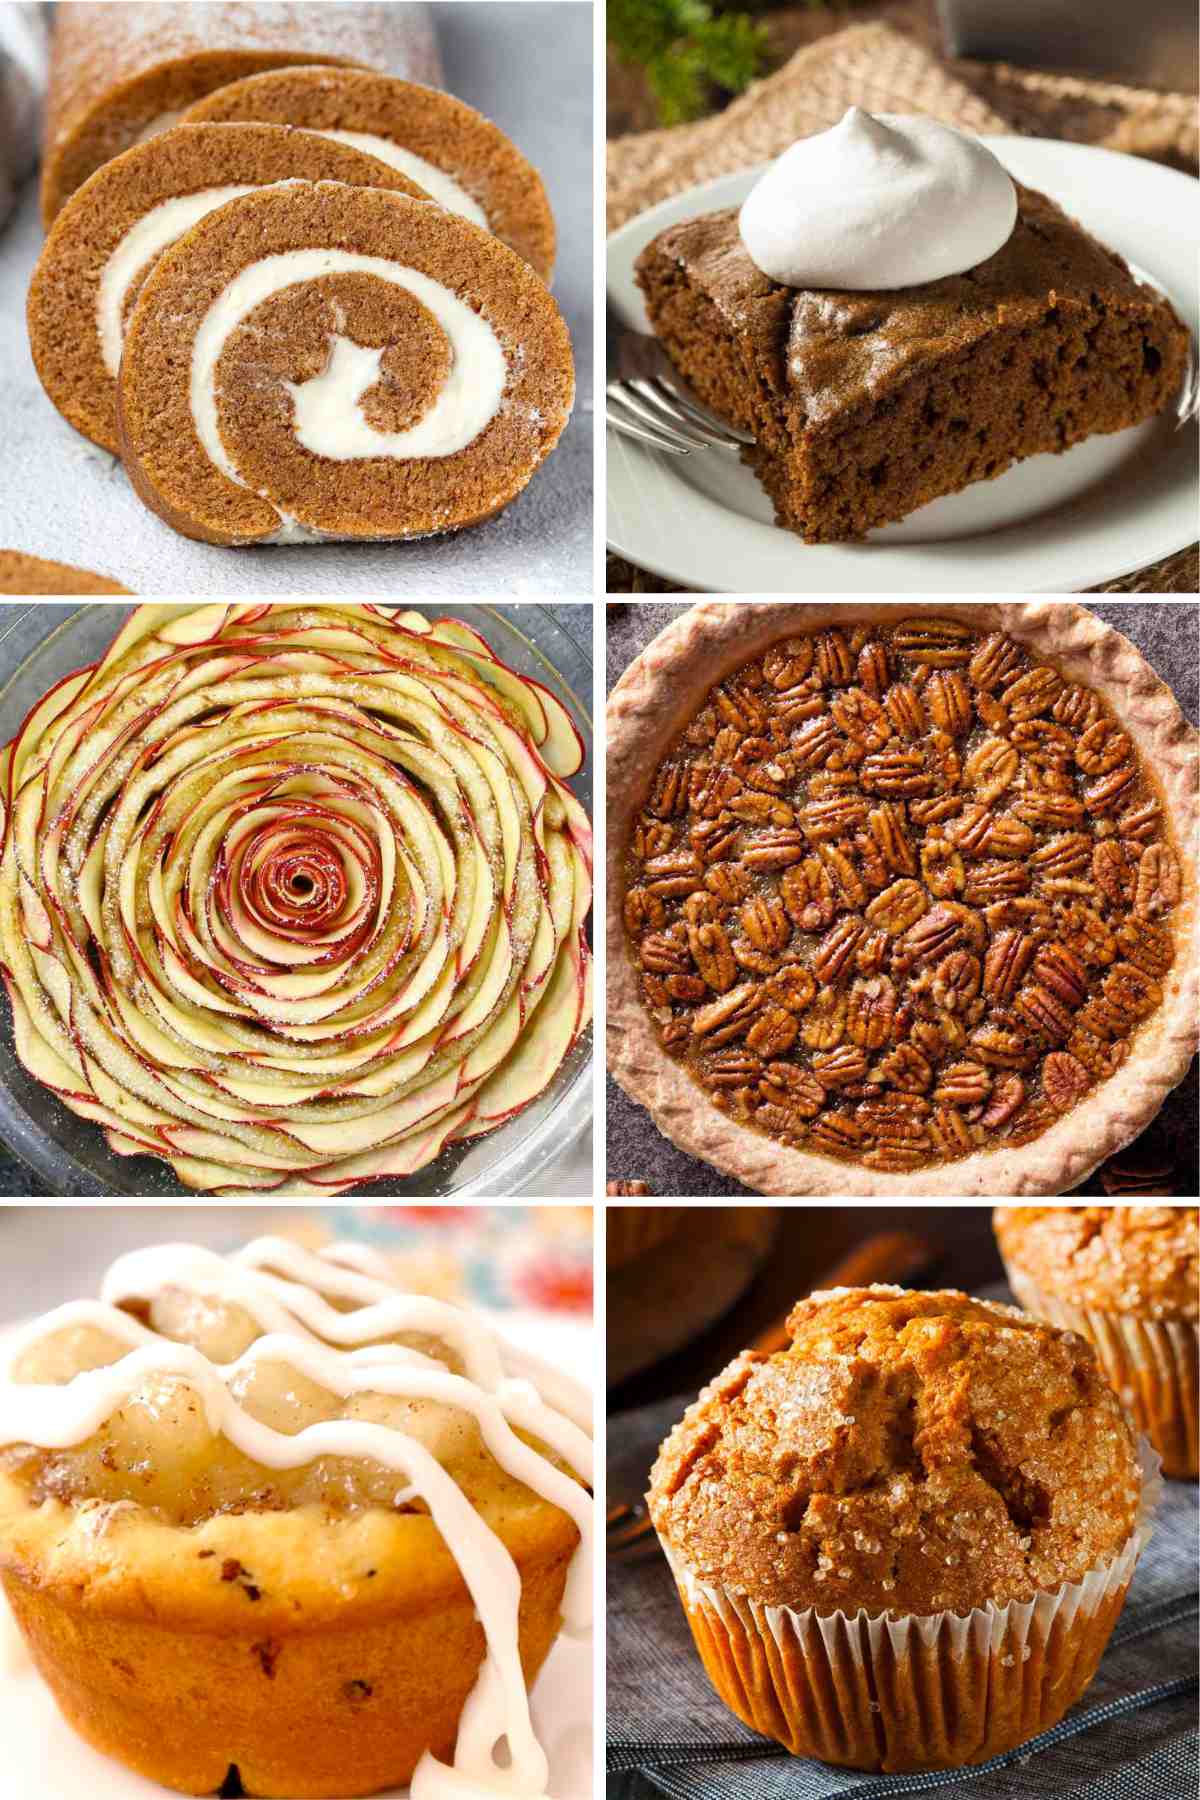 Fall desserts are the perfect after-dinner treats once the weather starts getting colder and the leaves start falling. We’ll take you through 46 of the Best Fall Dessert Recipes. From pumpkin pie to cinnamon roll tarts, to Thanksgiving trifle and apple tacos, get baking and enjoy these cozy autumn desserts!